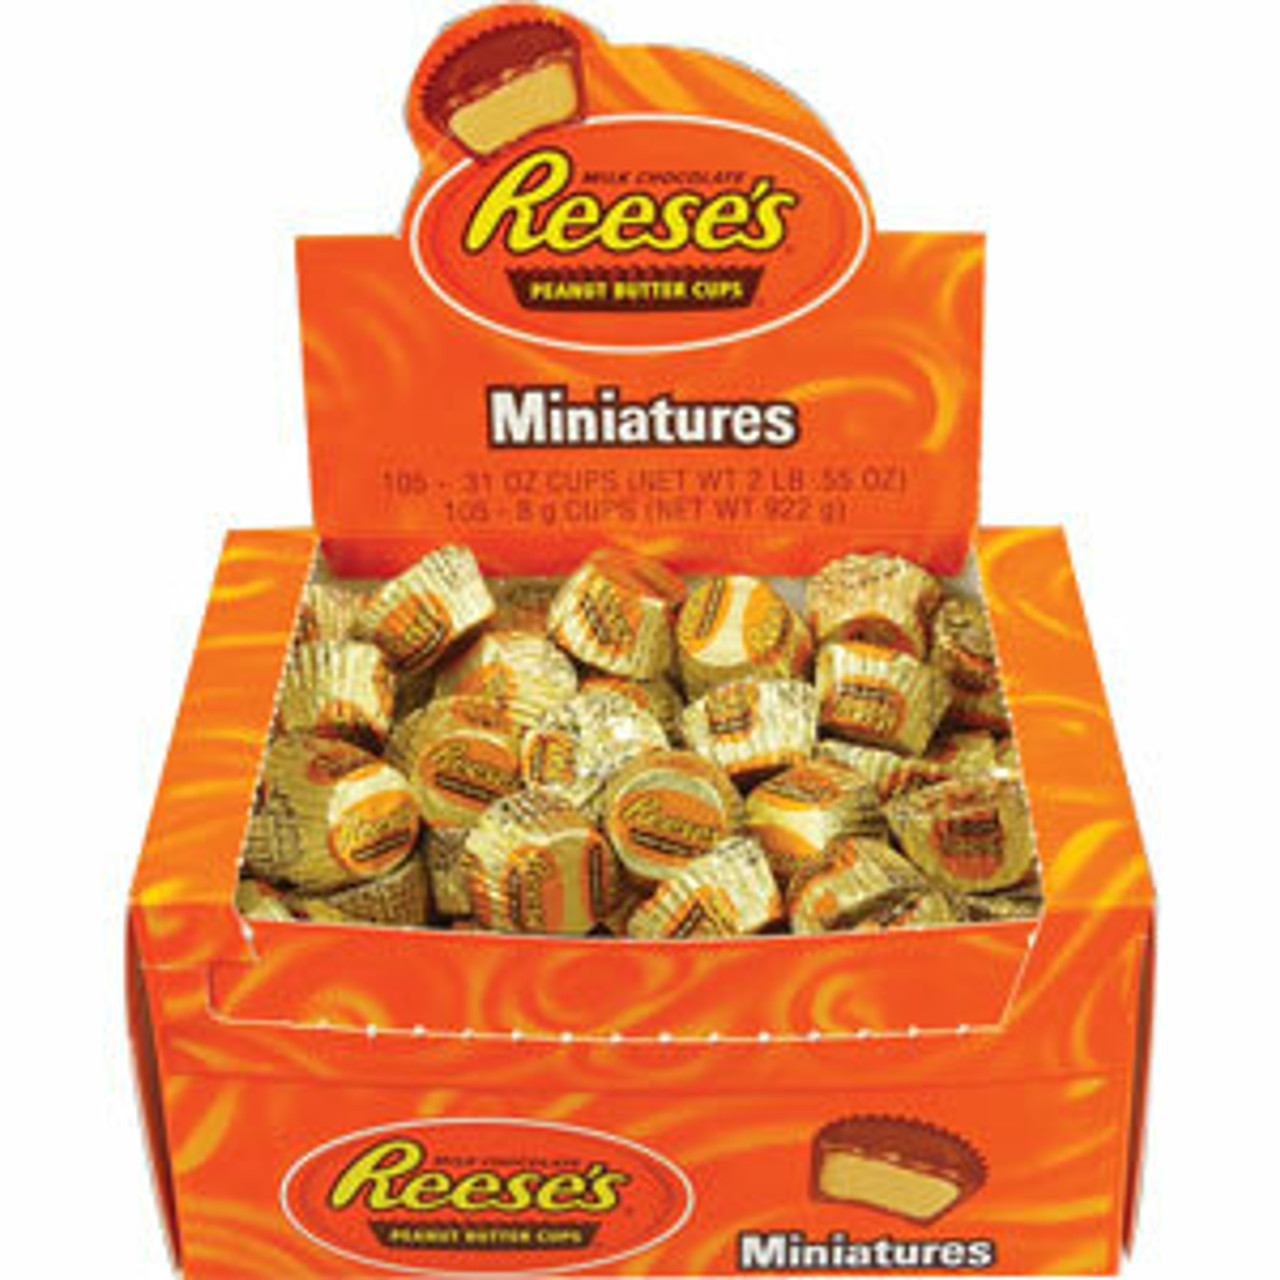 Reese's Peanut Butter Cup, Miniature Size - 105 count box